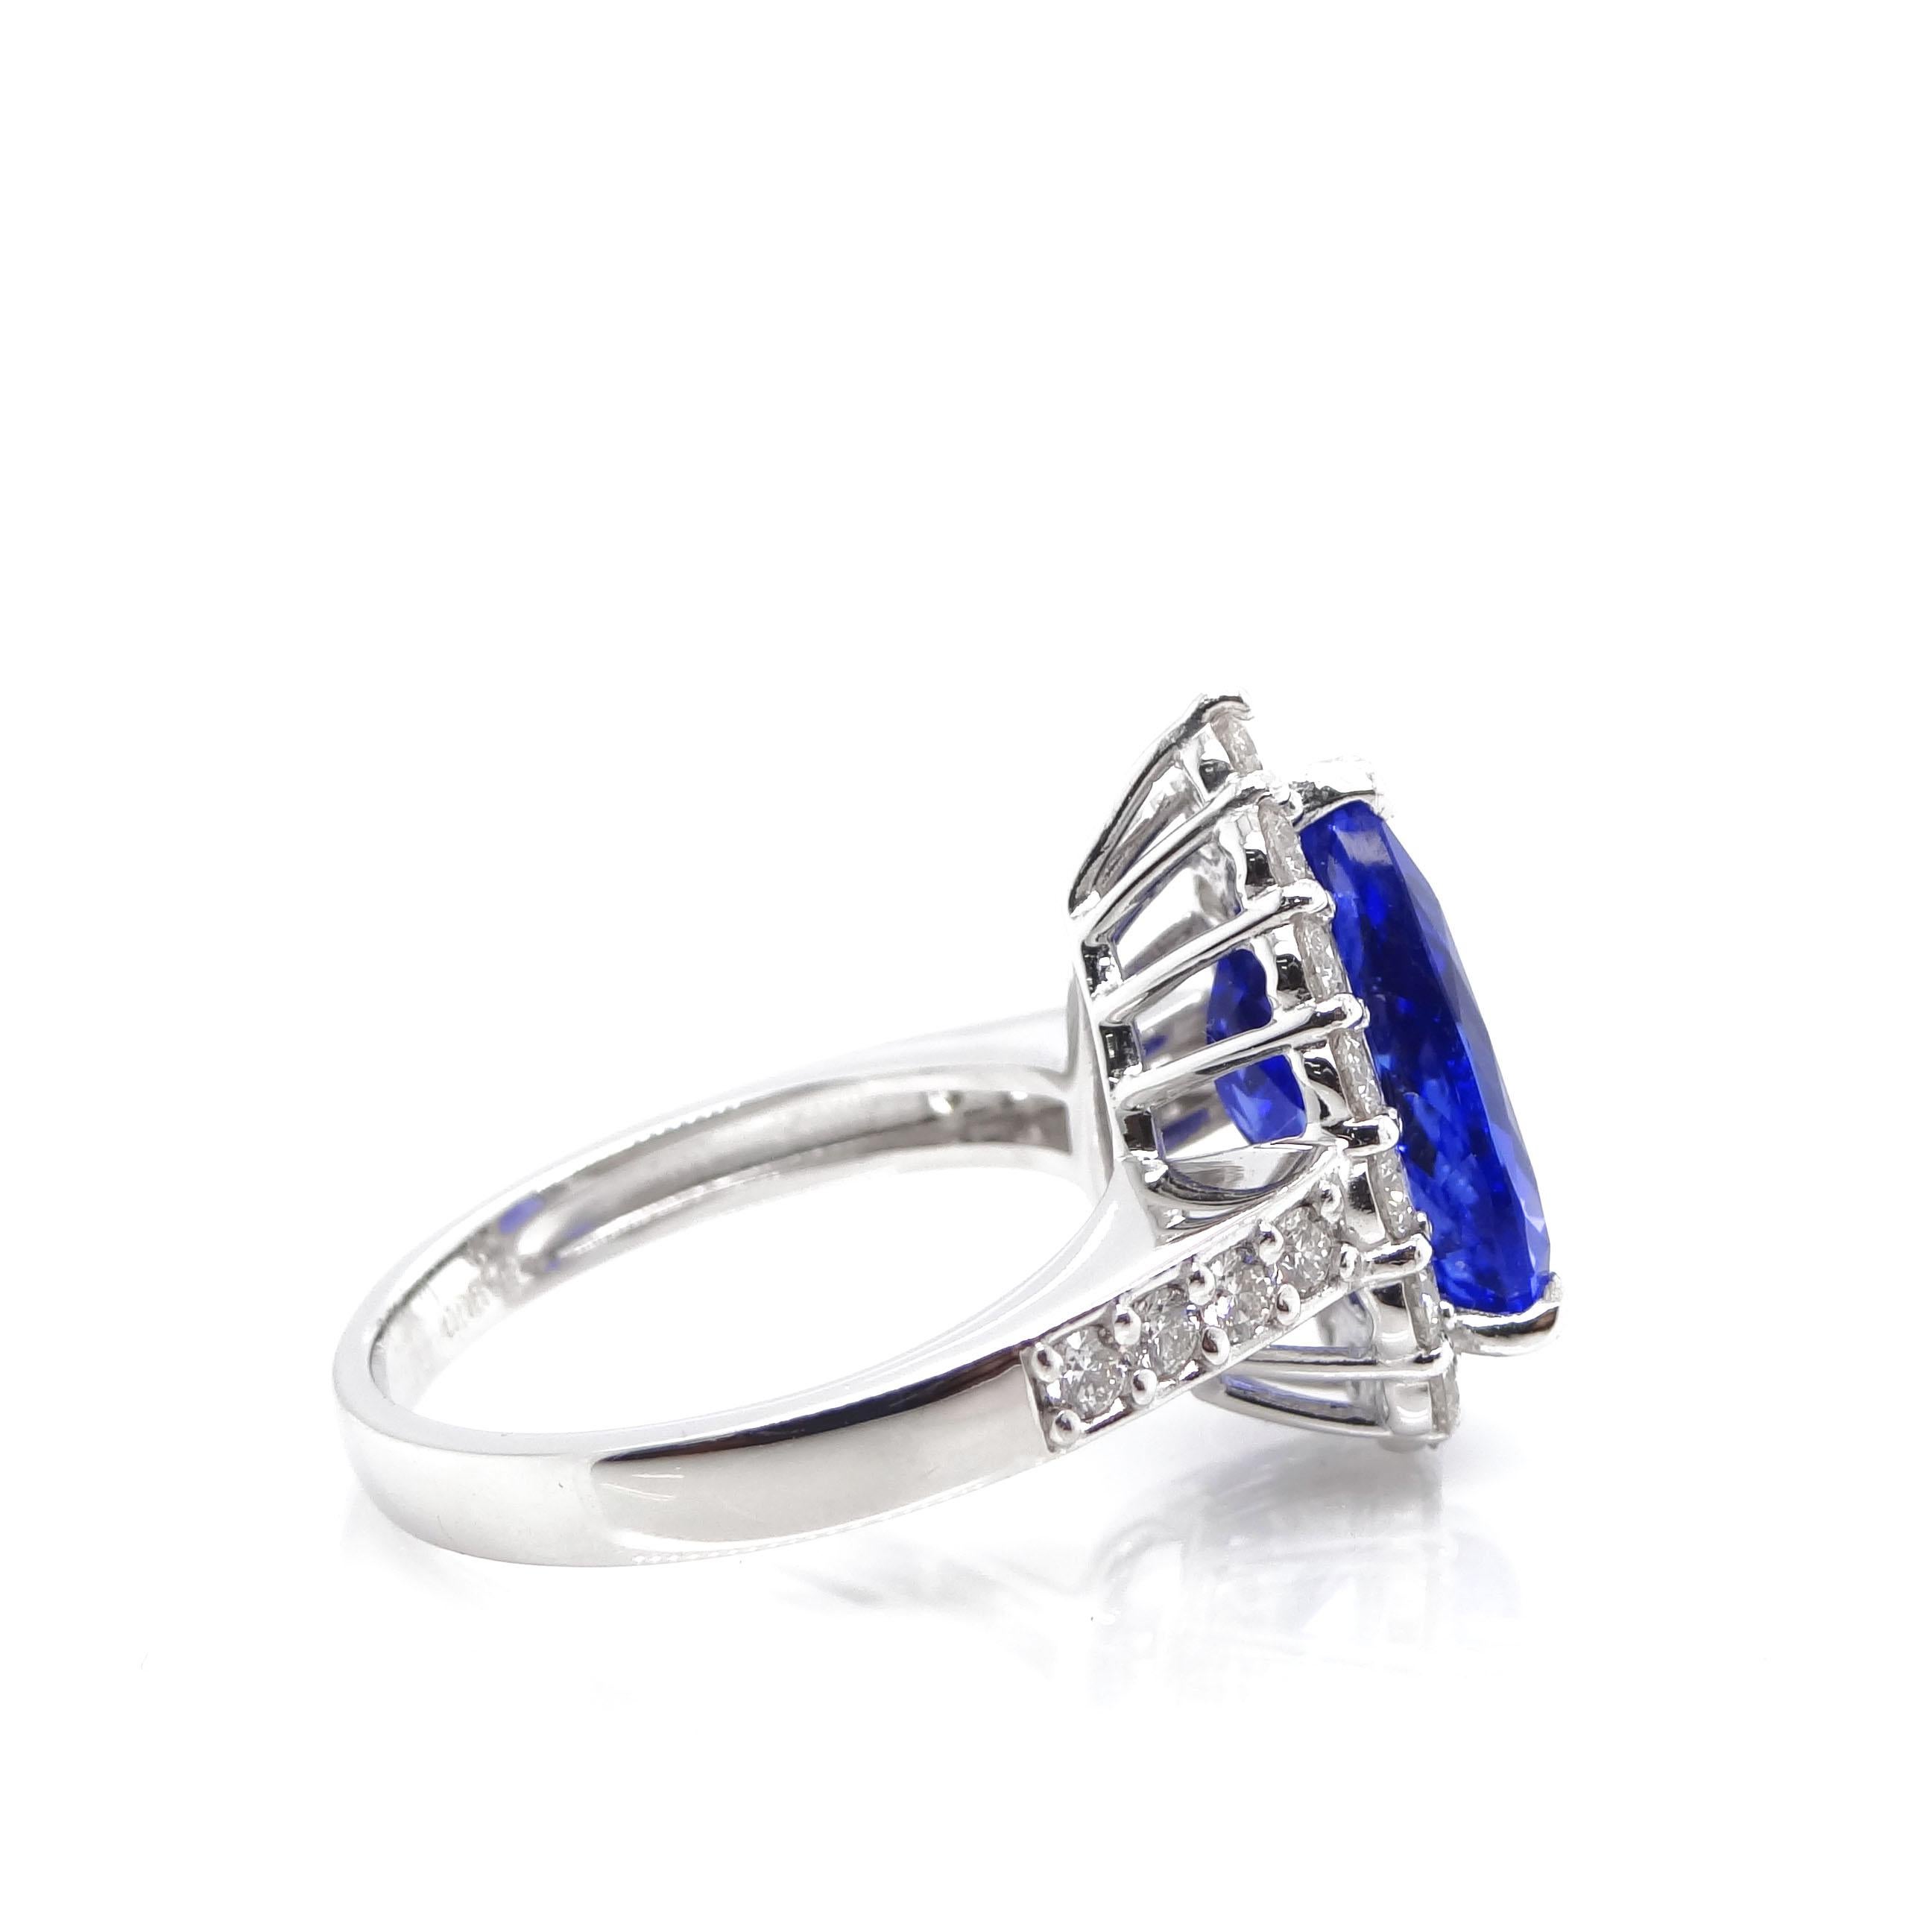 This is a stunning engagement ring consisting of a Pear-Shaped 4.43 Carat Tanzanite and 0.89 Carats of Diamond Accents set in Platinum. The Tanzanite exhibits a beautiful Violetish-Purple to Blue Hue. Tanzaniteis named after Tanzania which is the